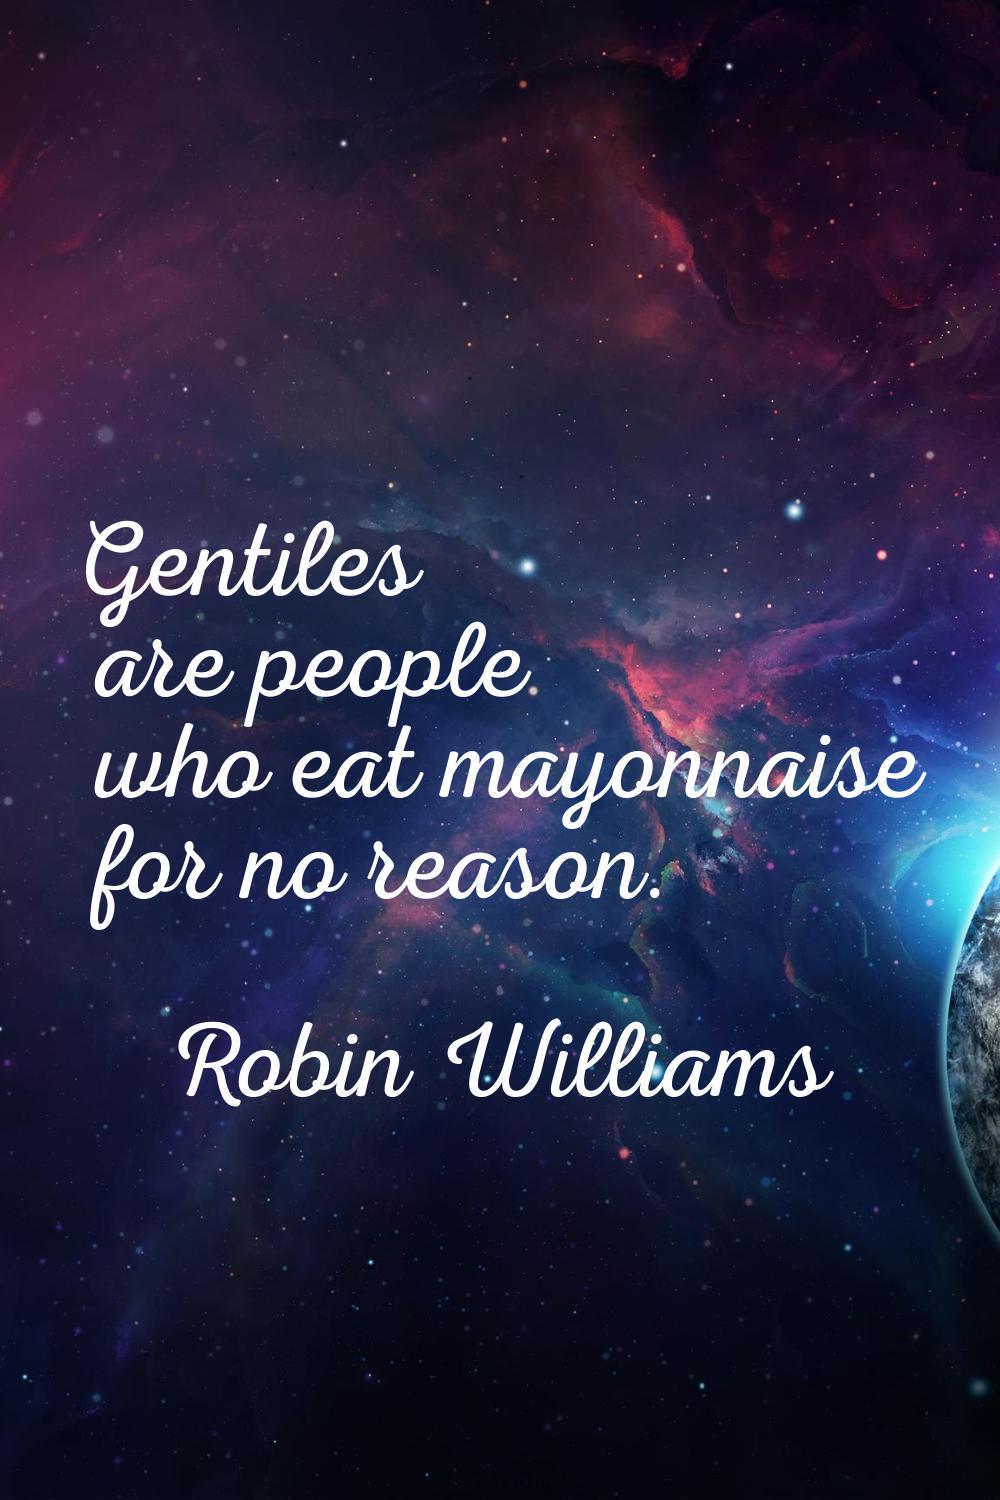 Gentiles are people who eat mayonnaise for no reason.